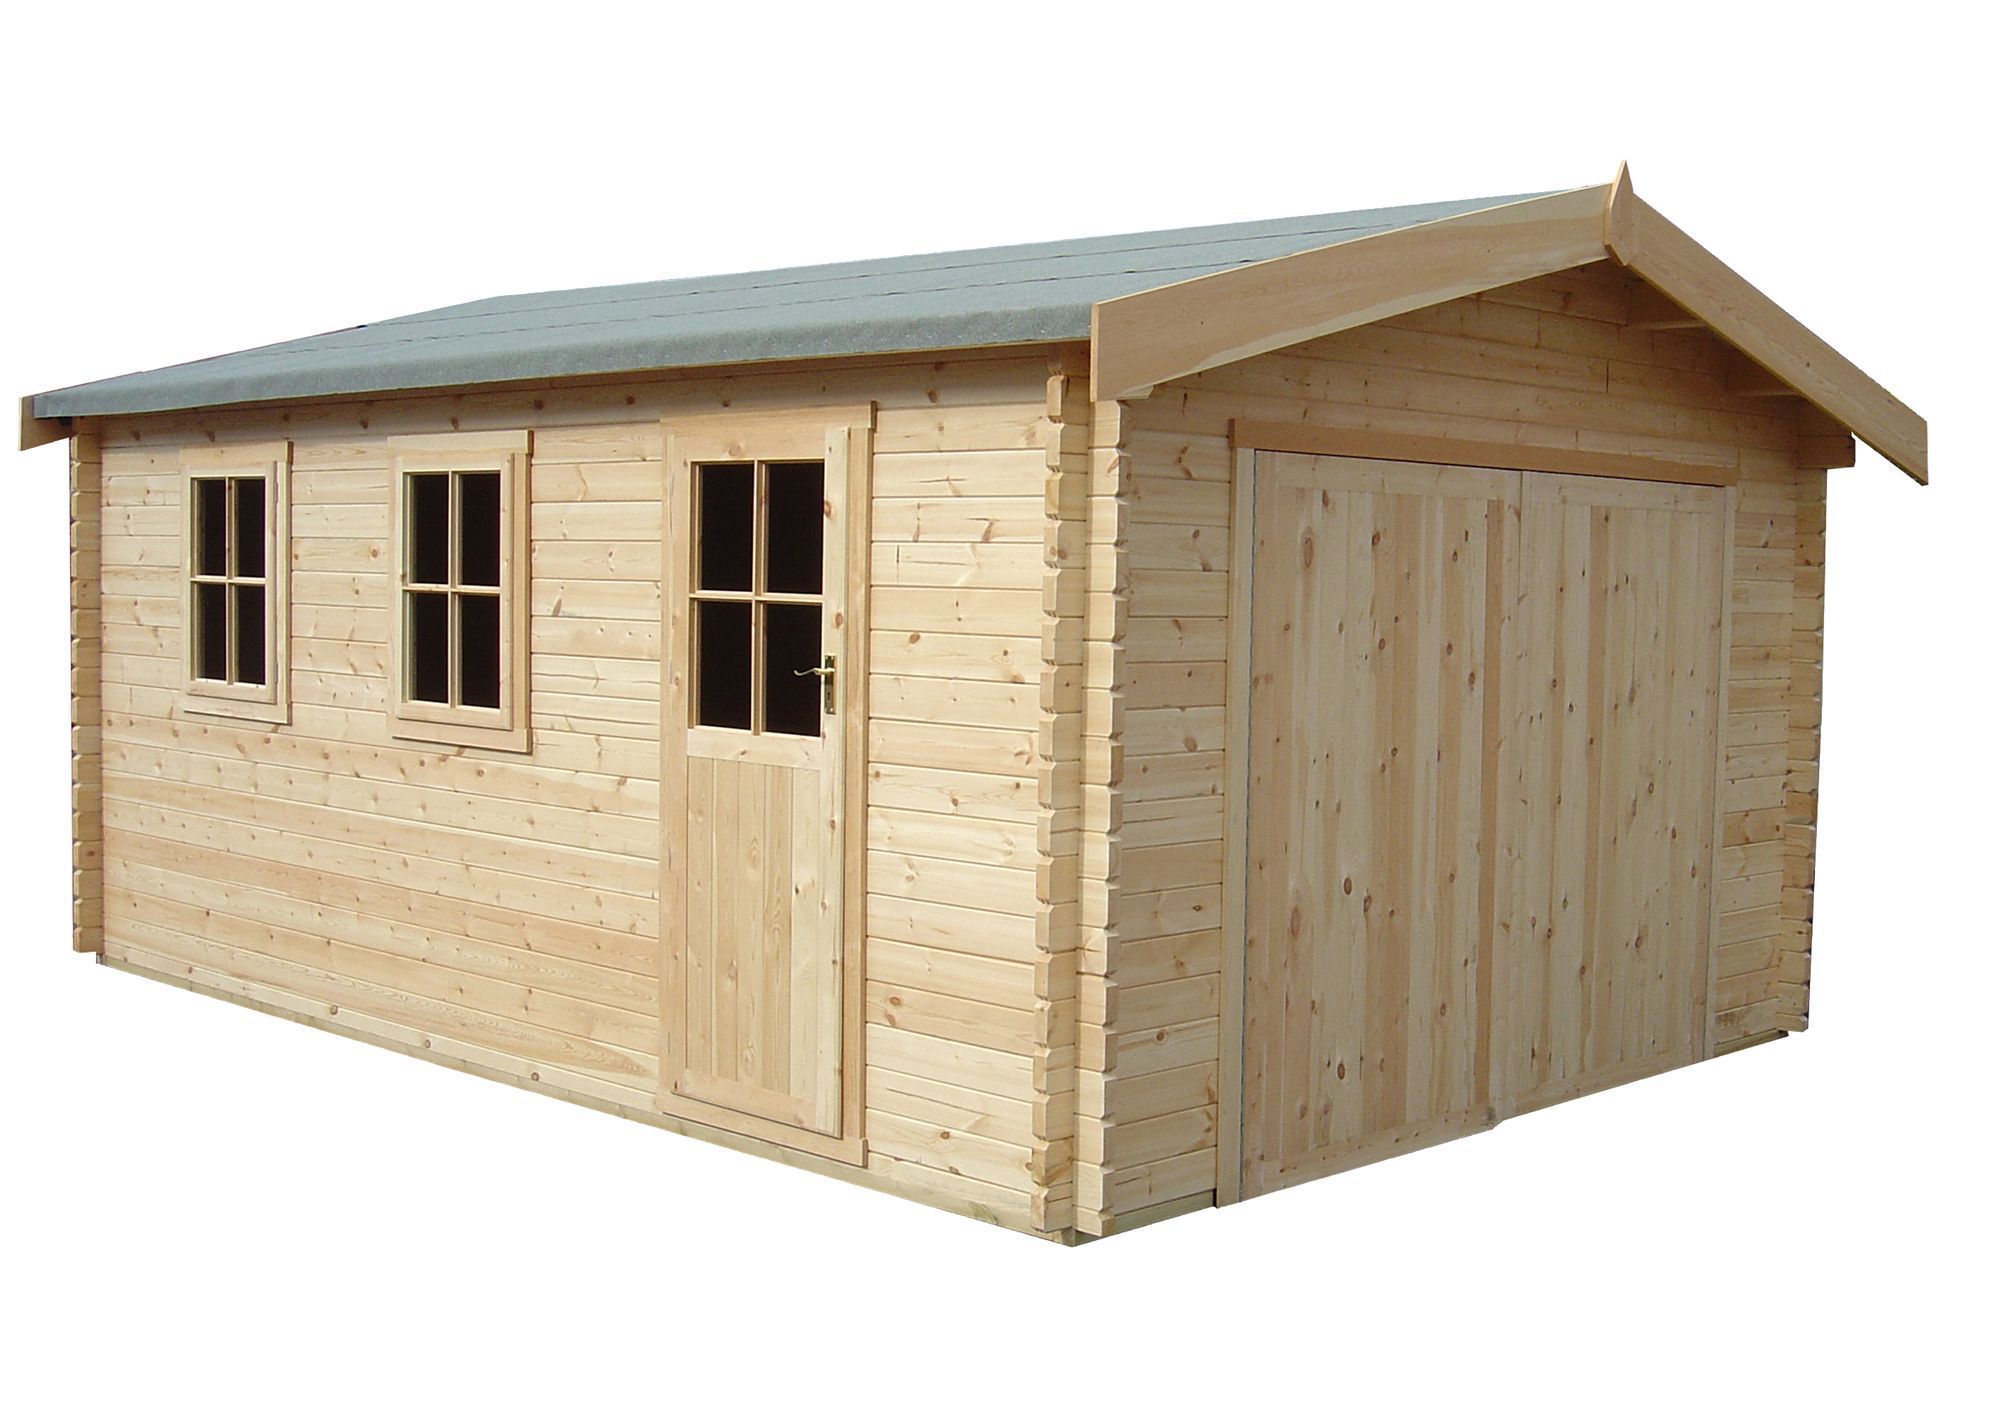 Shire 13x15 Bradenham Wooden Garage - Assembly service included